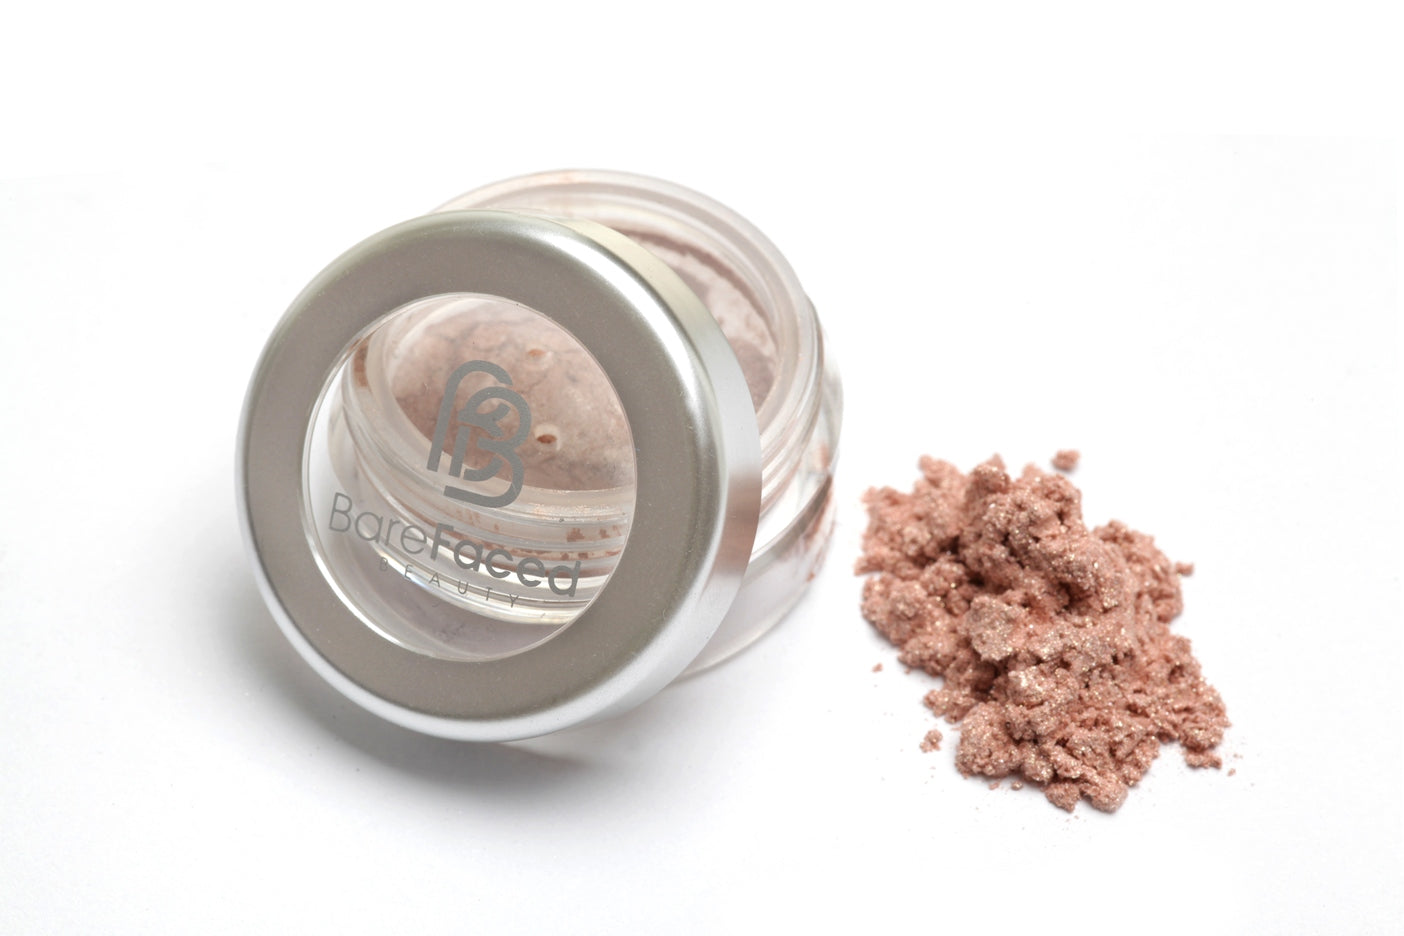 A small round pot of mineral eyeshadow, with a swatch of the powder next to it showing a shimmery apricot shade